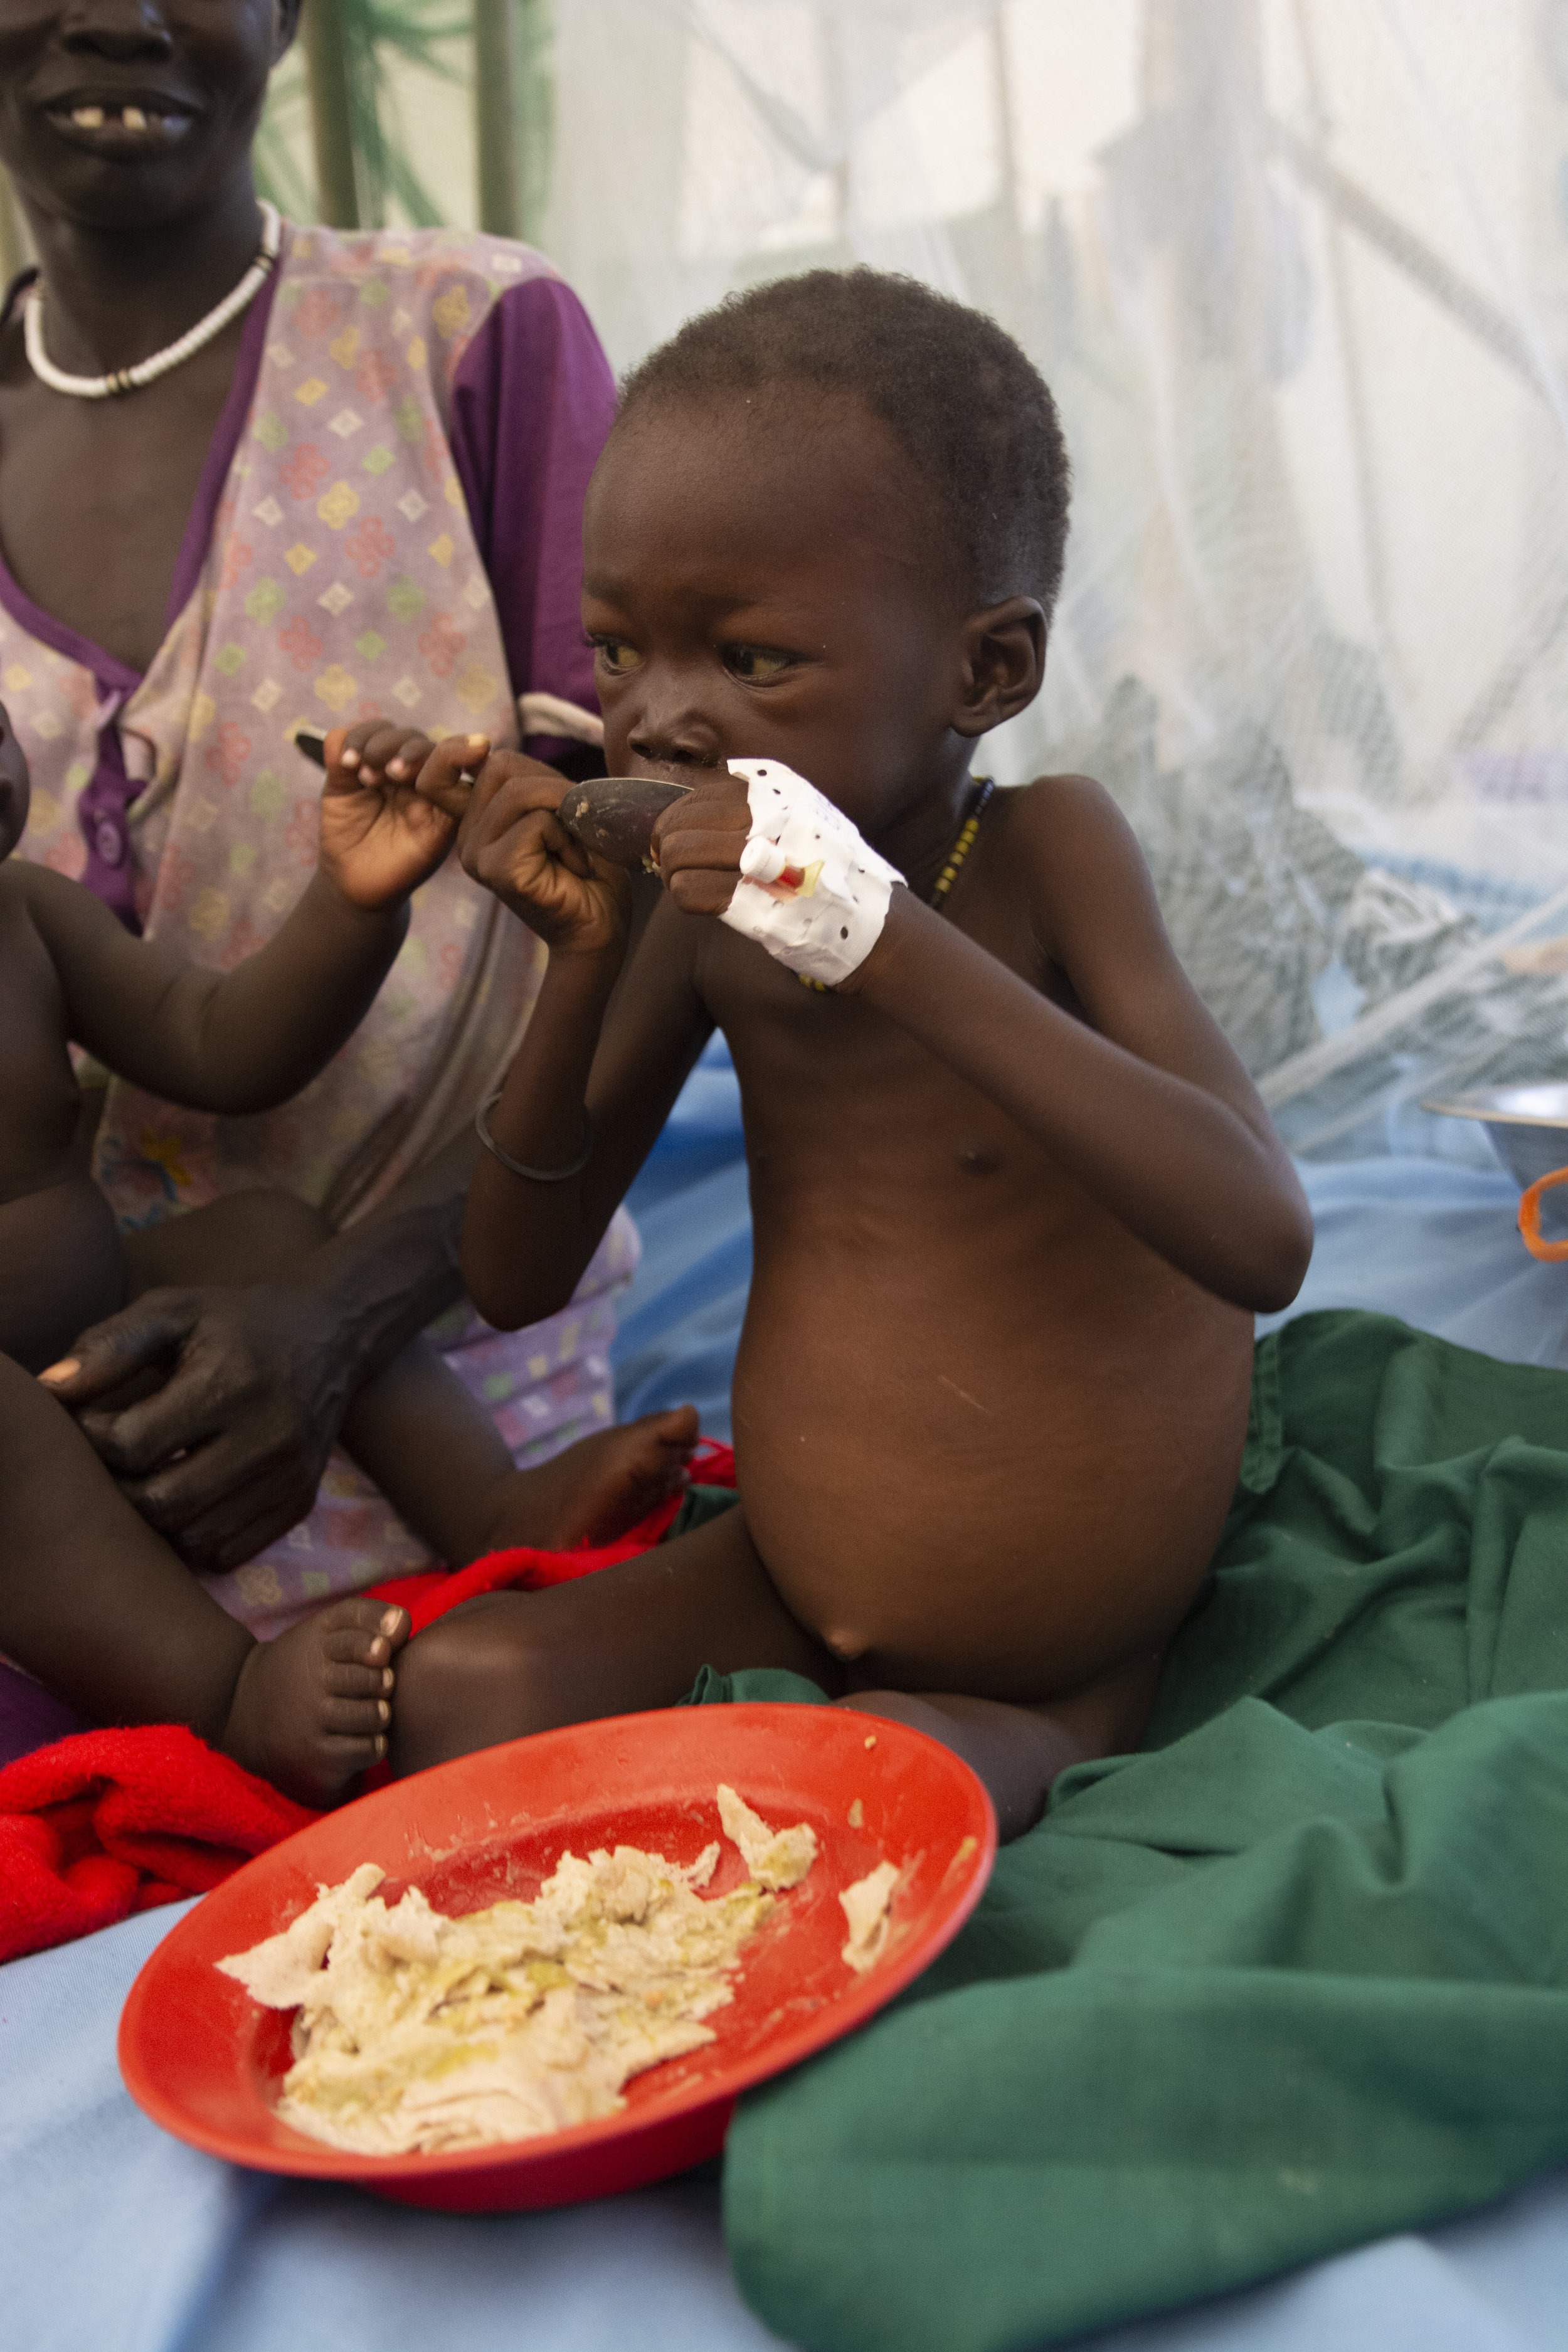  Malnutrition is epidemic in the outlying areas of Malakal. Because of fighting, many families fled to the bush where access to food and medical care is limited or non-existent. Forced to eat roots and drink dirty water many suffer from Kwashiorkor, 